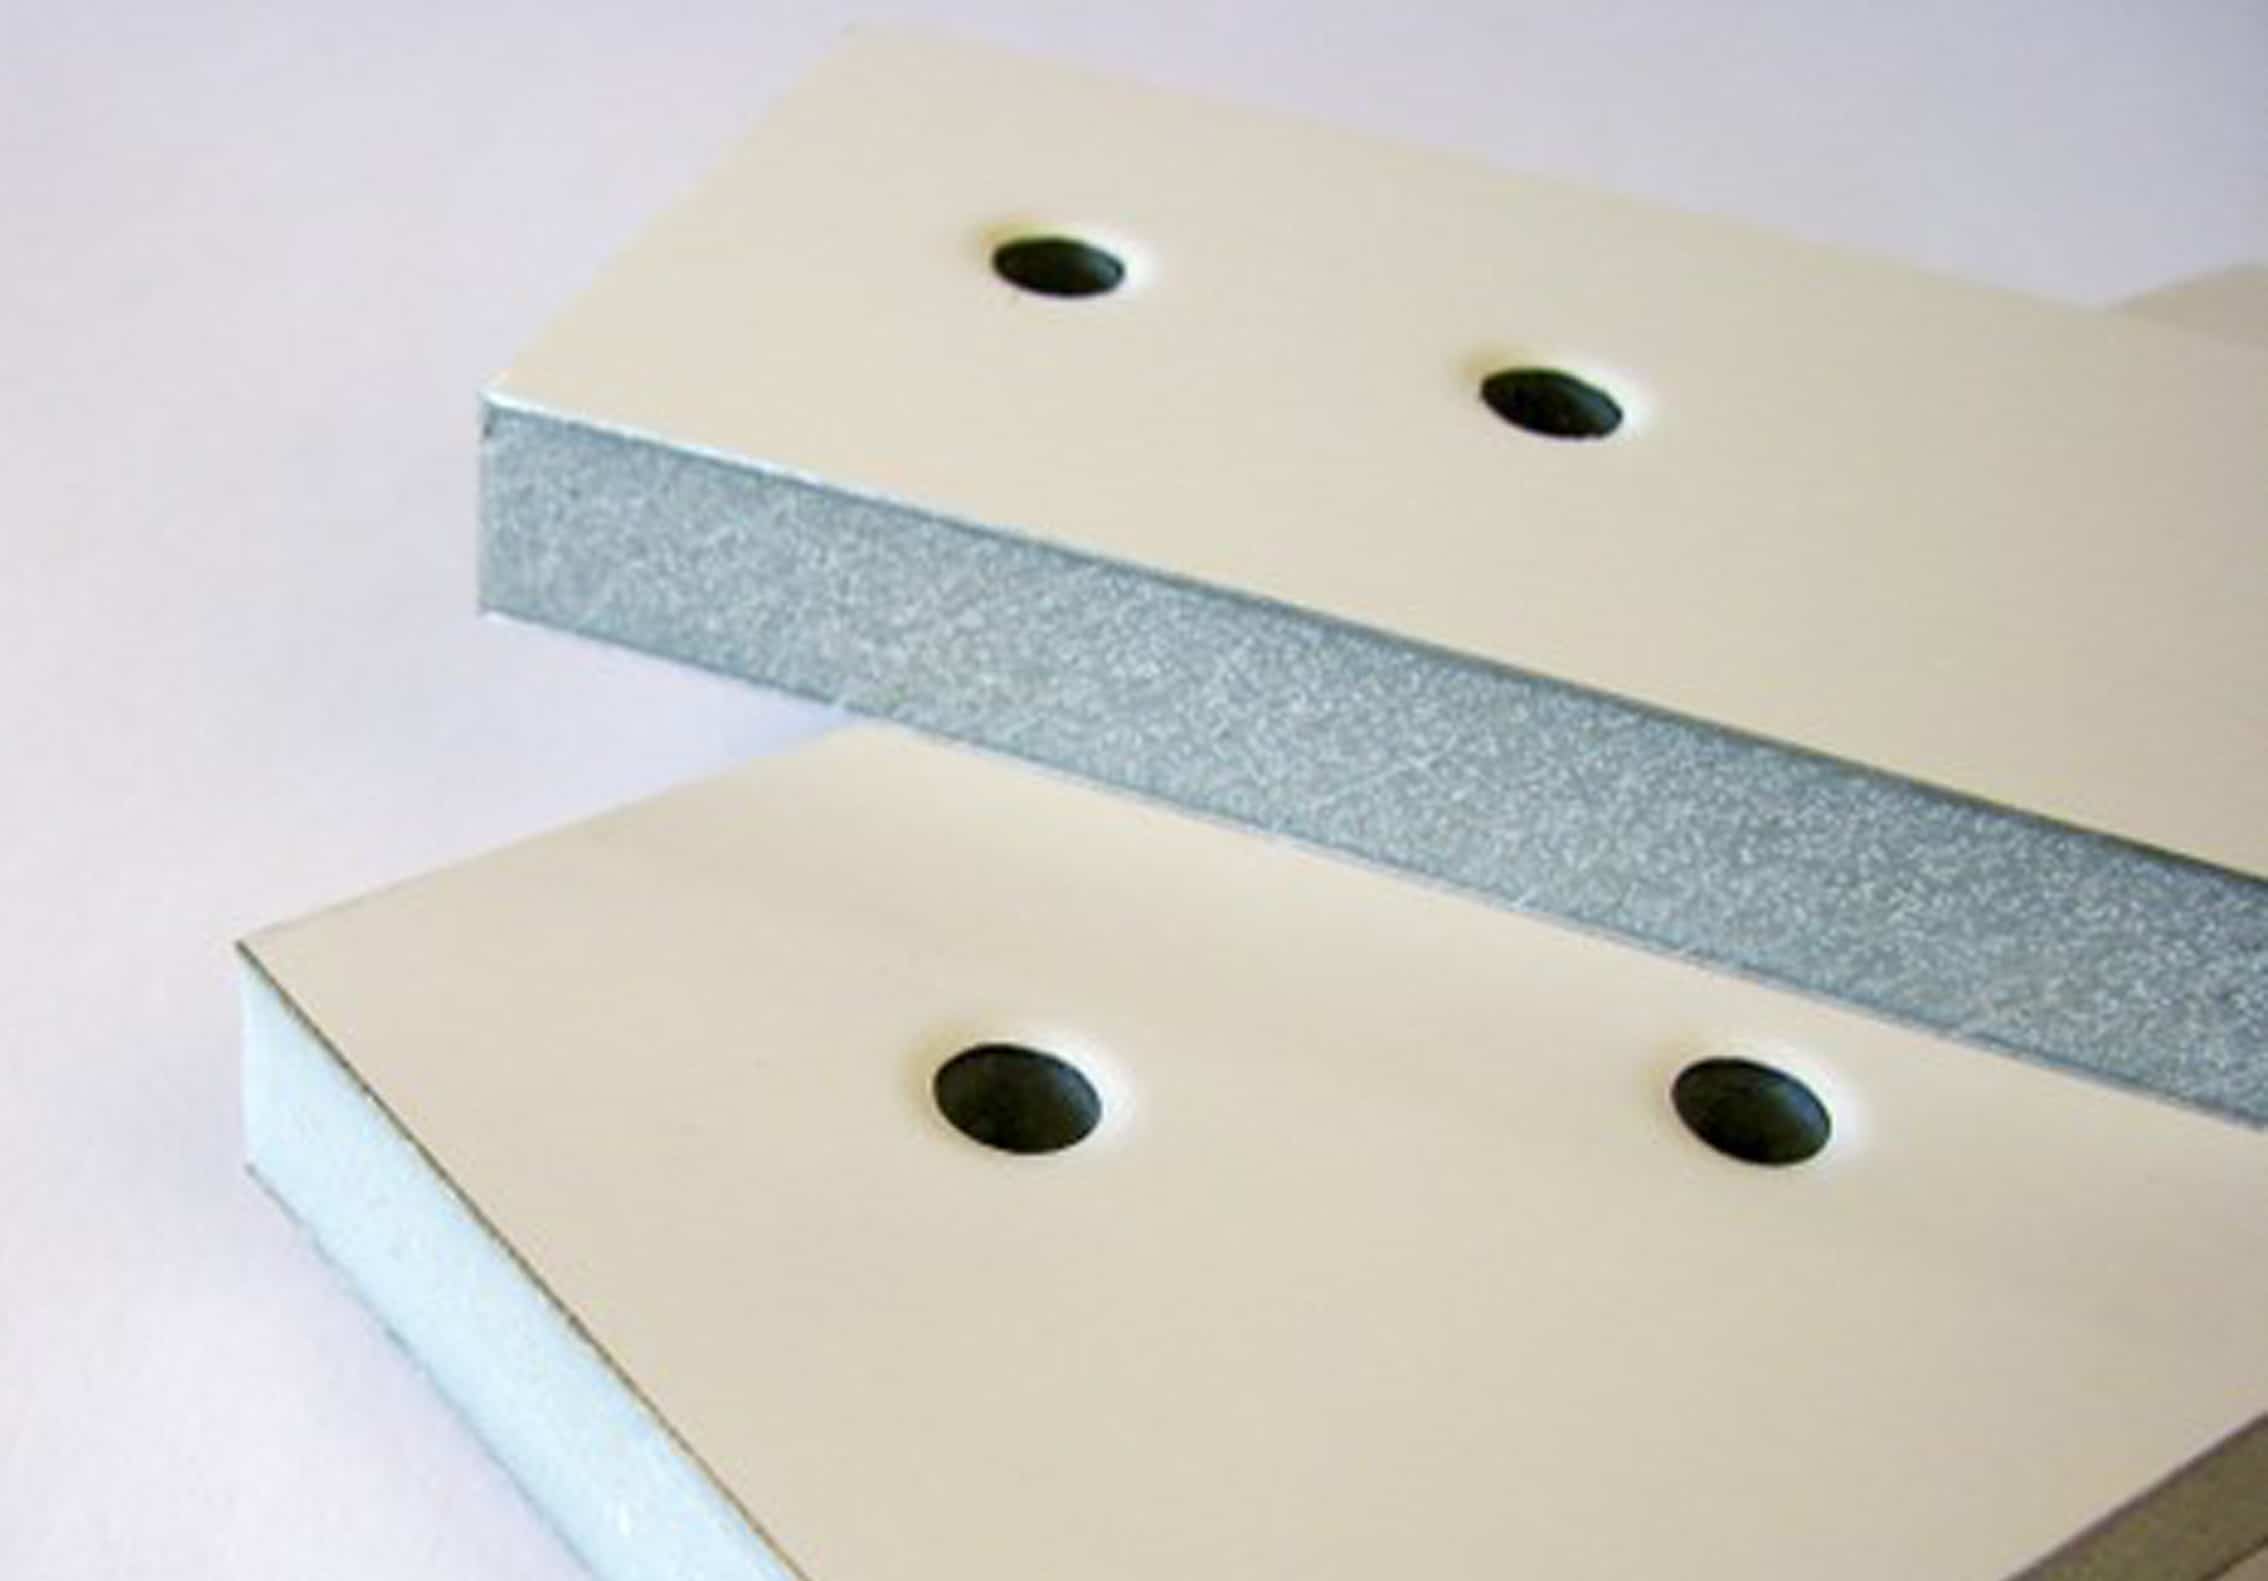 Composite parts with holes